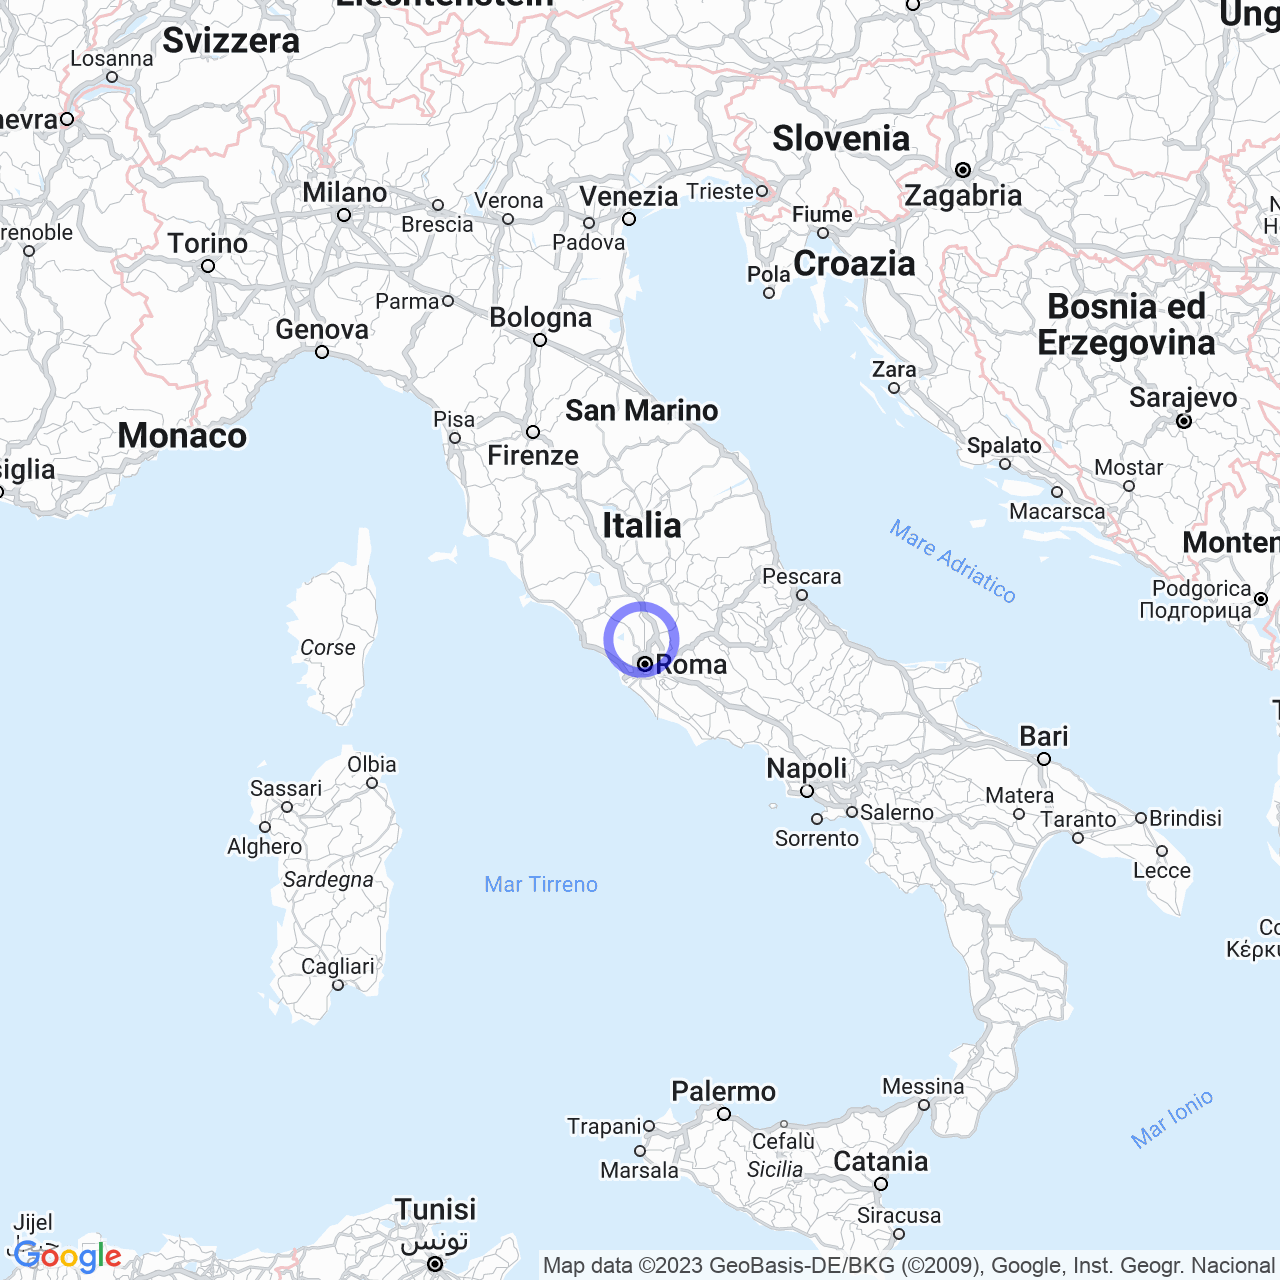 Discover Sacrofano: geological and archaeological treasures in Lazio. map